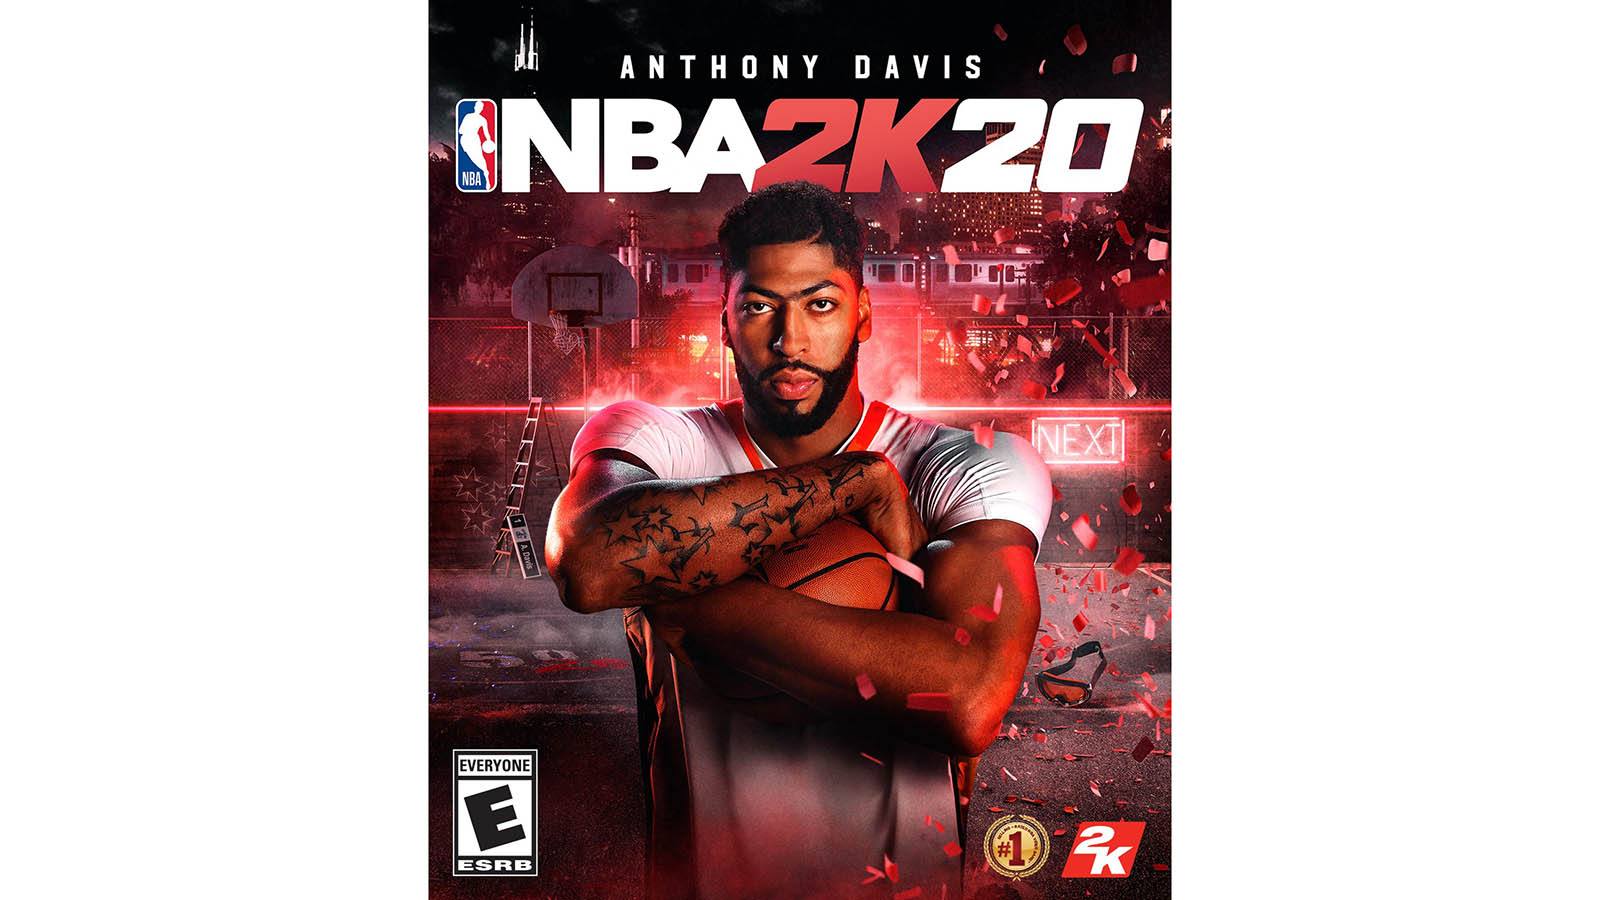 ESPN to Broadcast Players-Only NBA 2K Series Starting April 3rd